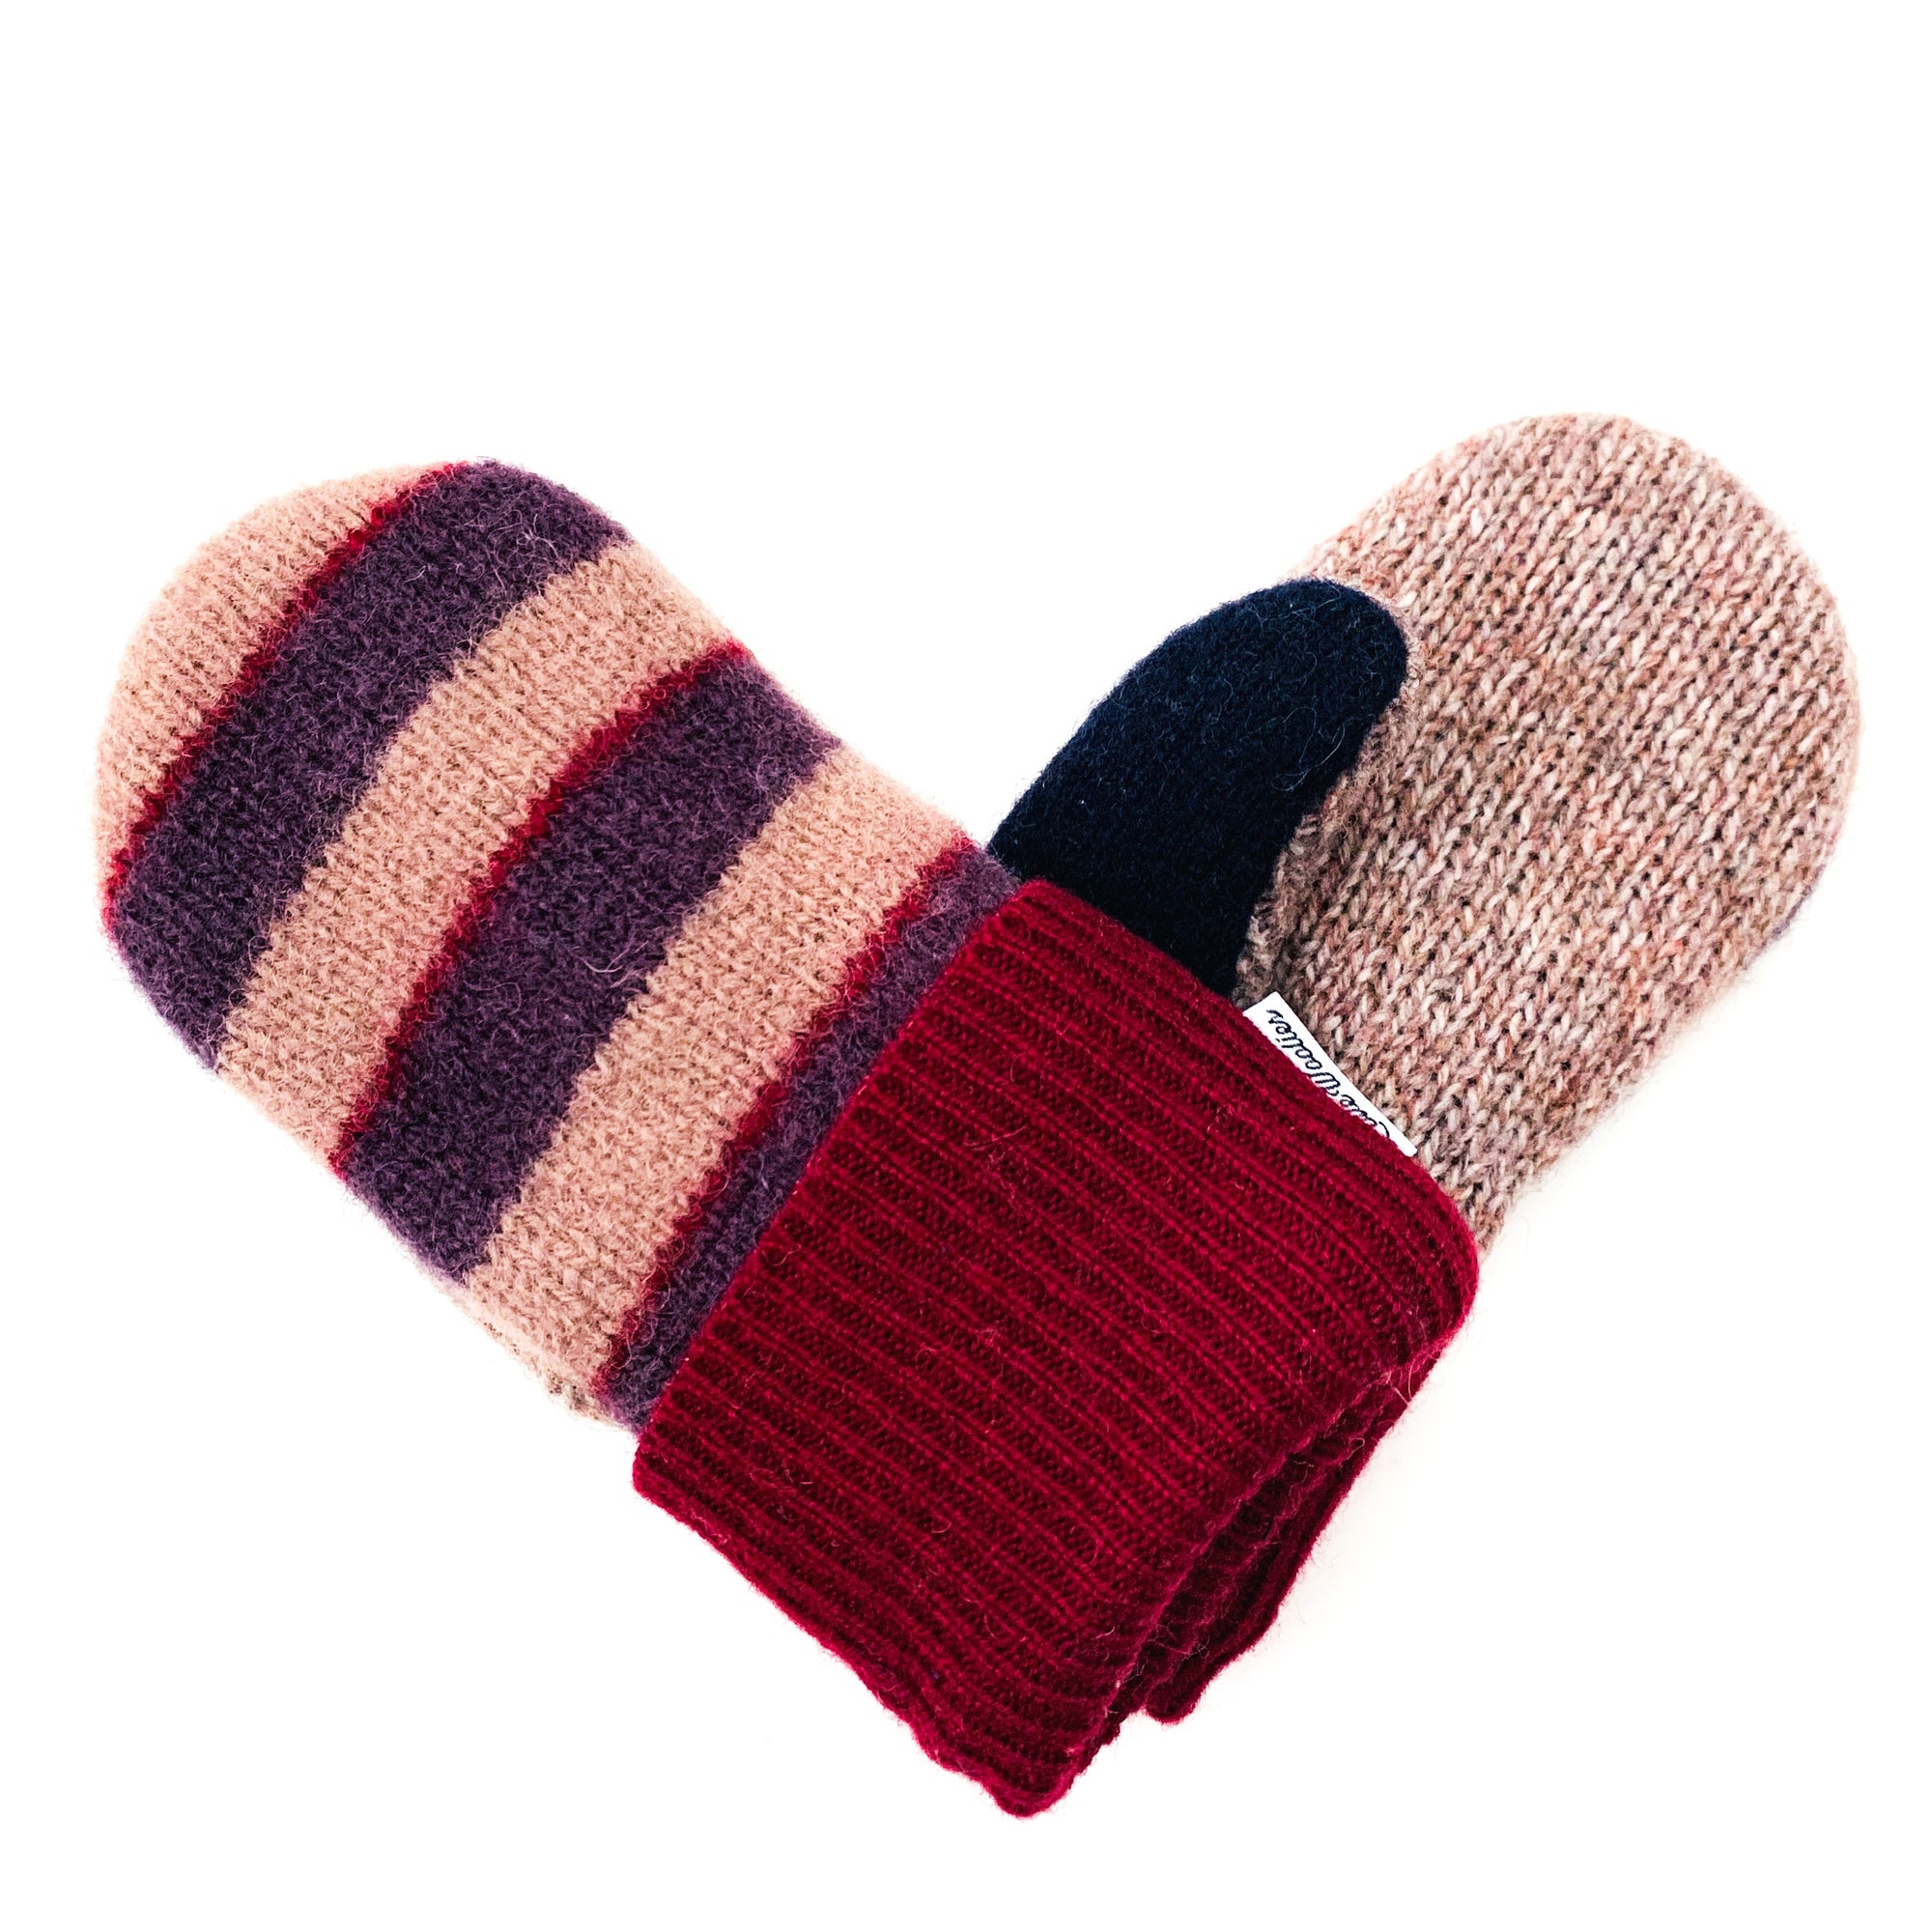 Small Kid's Wool Sweater Mittens | Cranberry Sauce